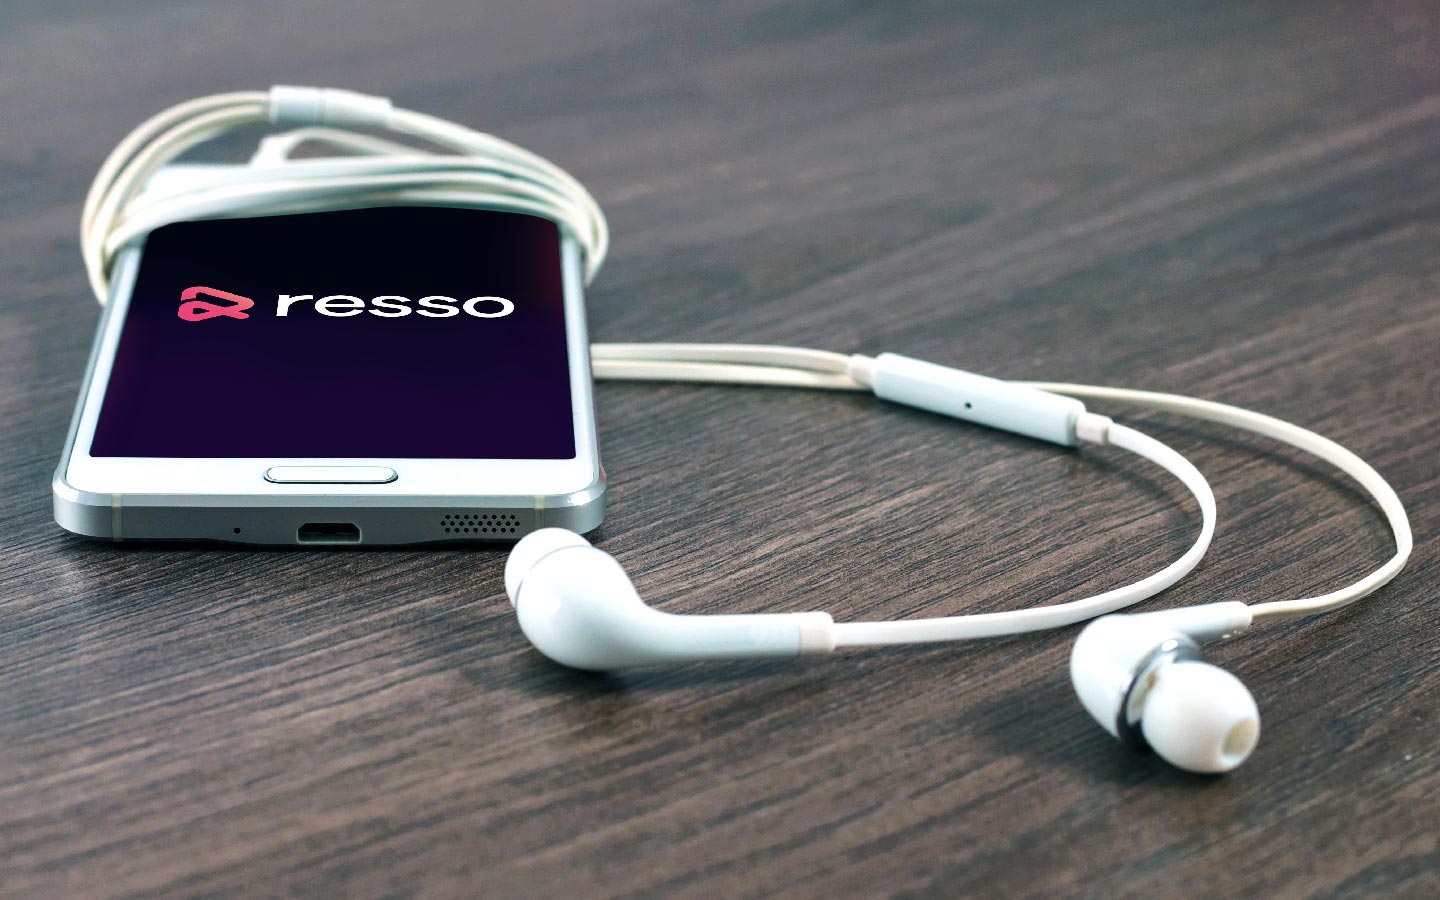 ByteDance already owns Resso, a music streaming service active in some countries